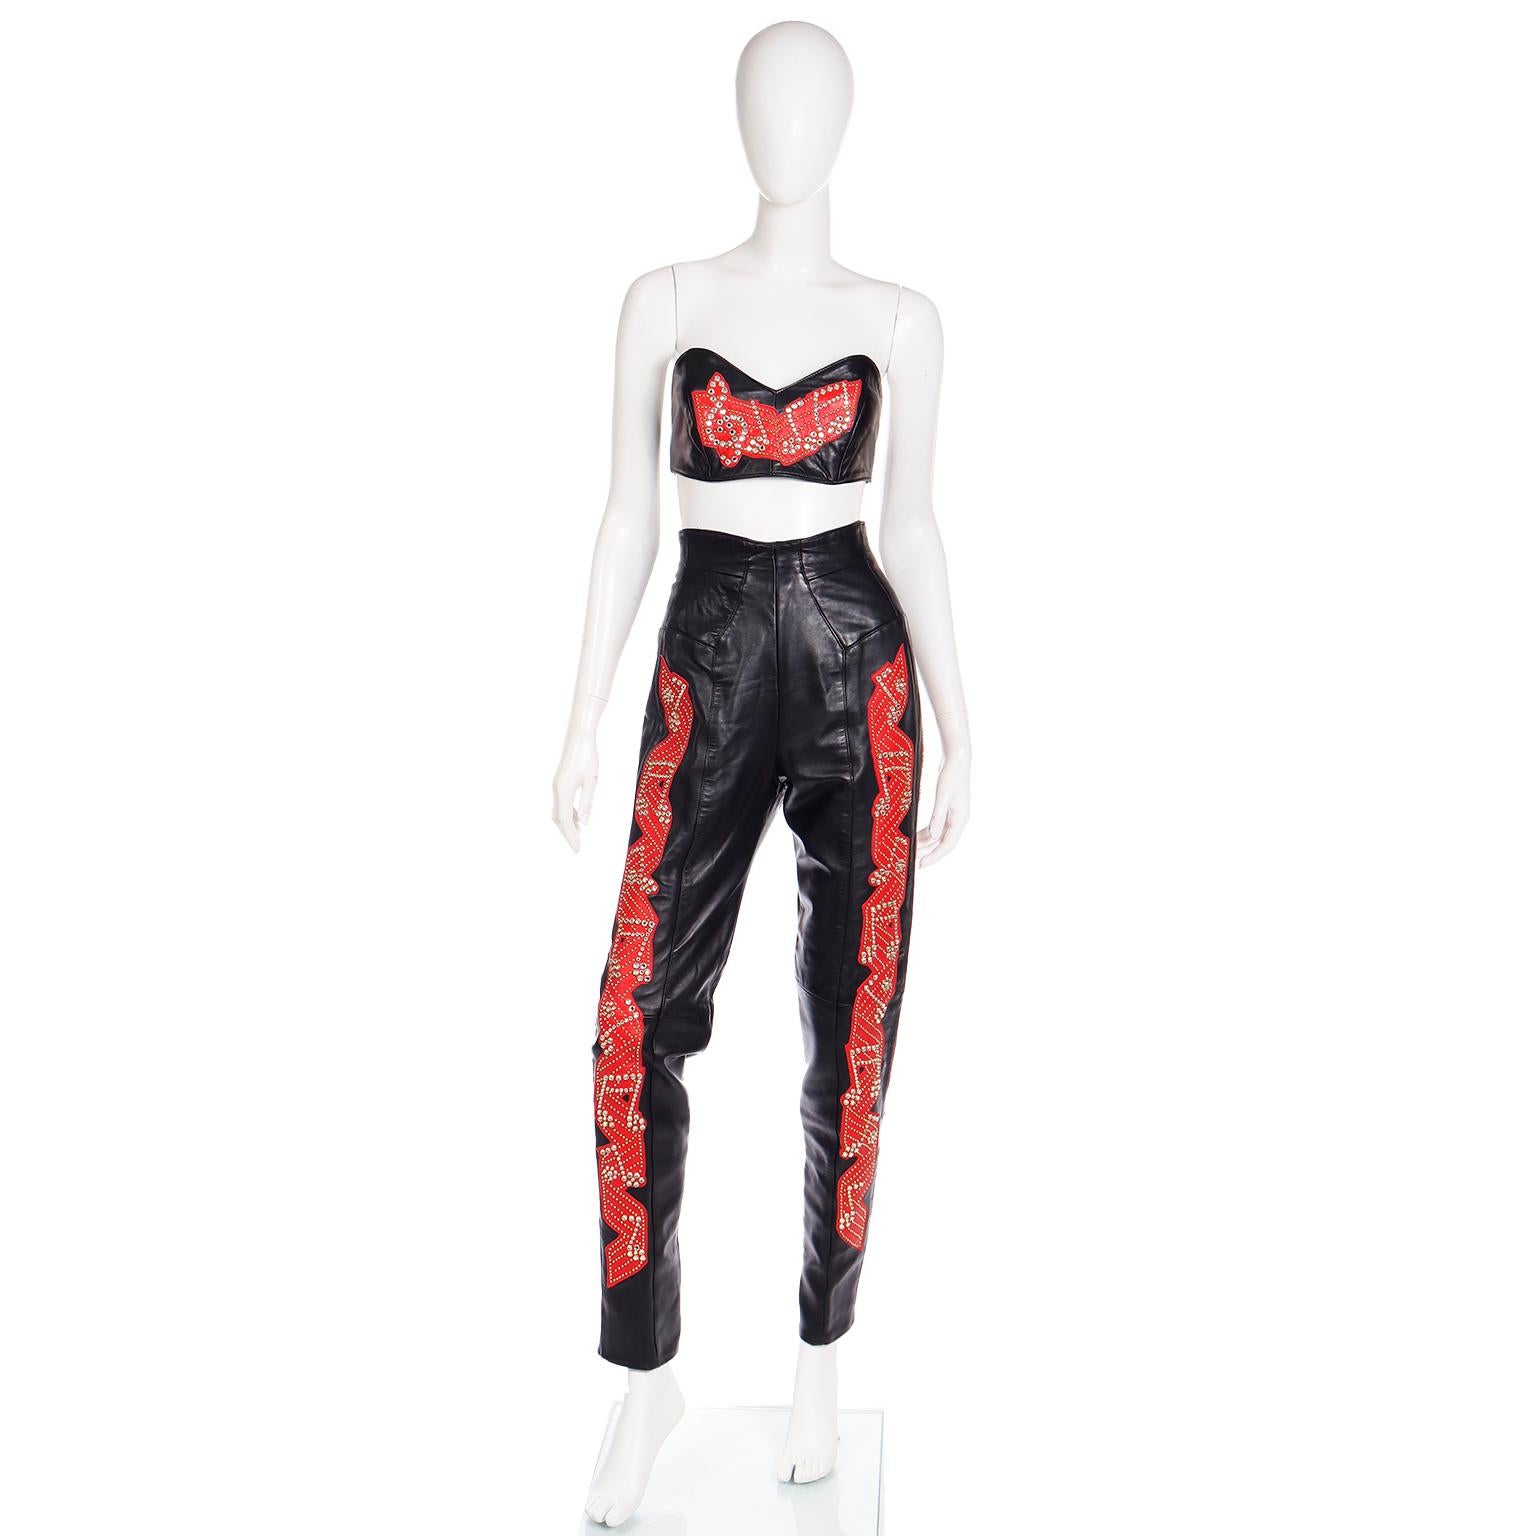 This is a truly one of a kind vintage 1980's Michael Hoban for North Beach leather 3 piece red music theme leather outfit! This show stopping ensemble includes a pair of high waisted leather pants, a bustier, and a jacket. All have red appliques